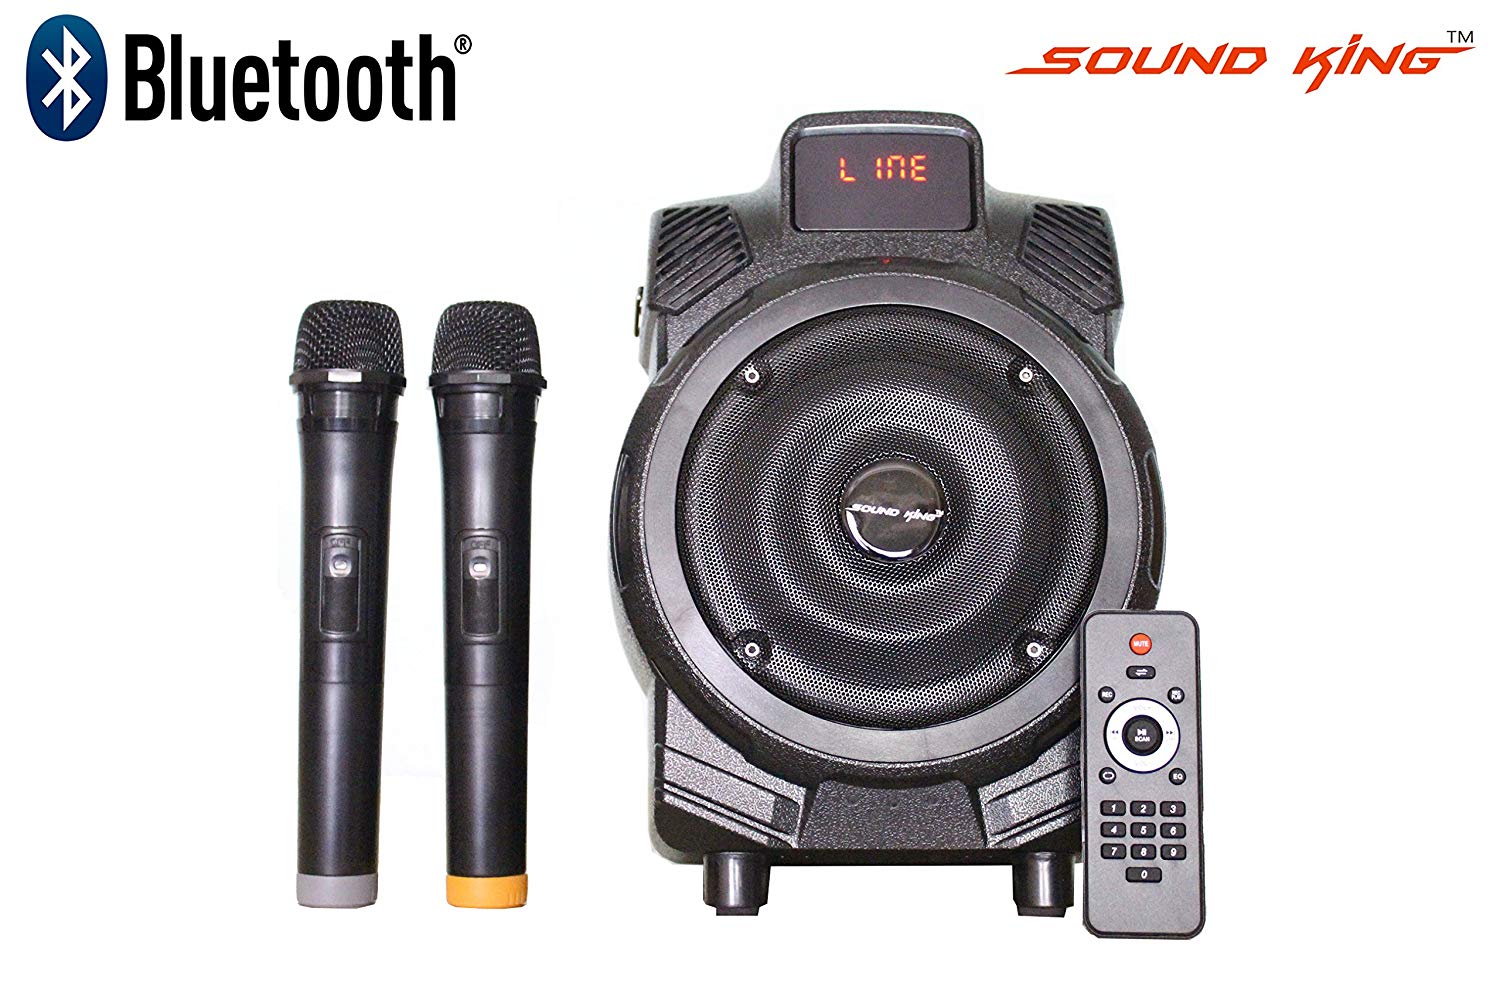 Sound King SK-752H Portable Amplifier With Bluetooth,USB & Card Reader slot & Two Wireless Microphone Price in India